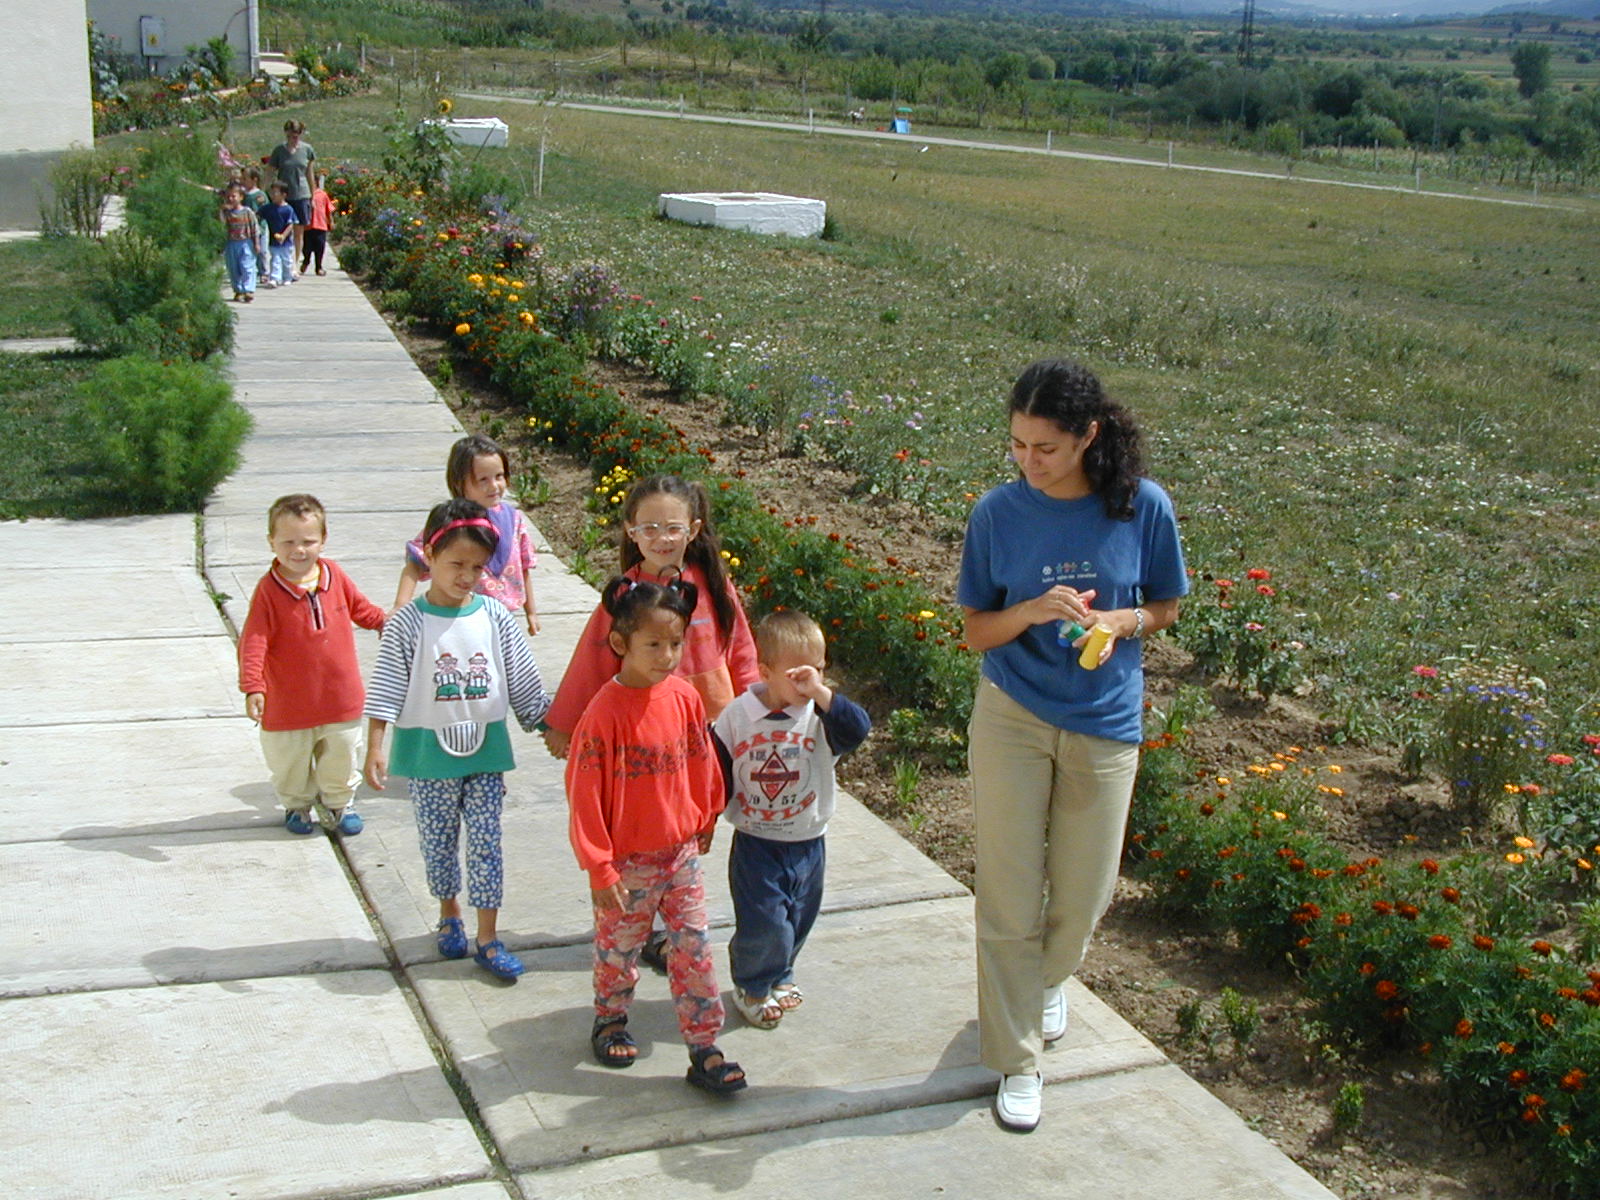 Children take an afternoon walk in the grounds at Bistritia.